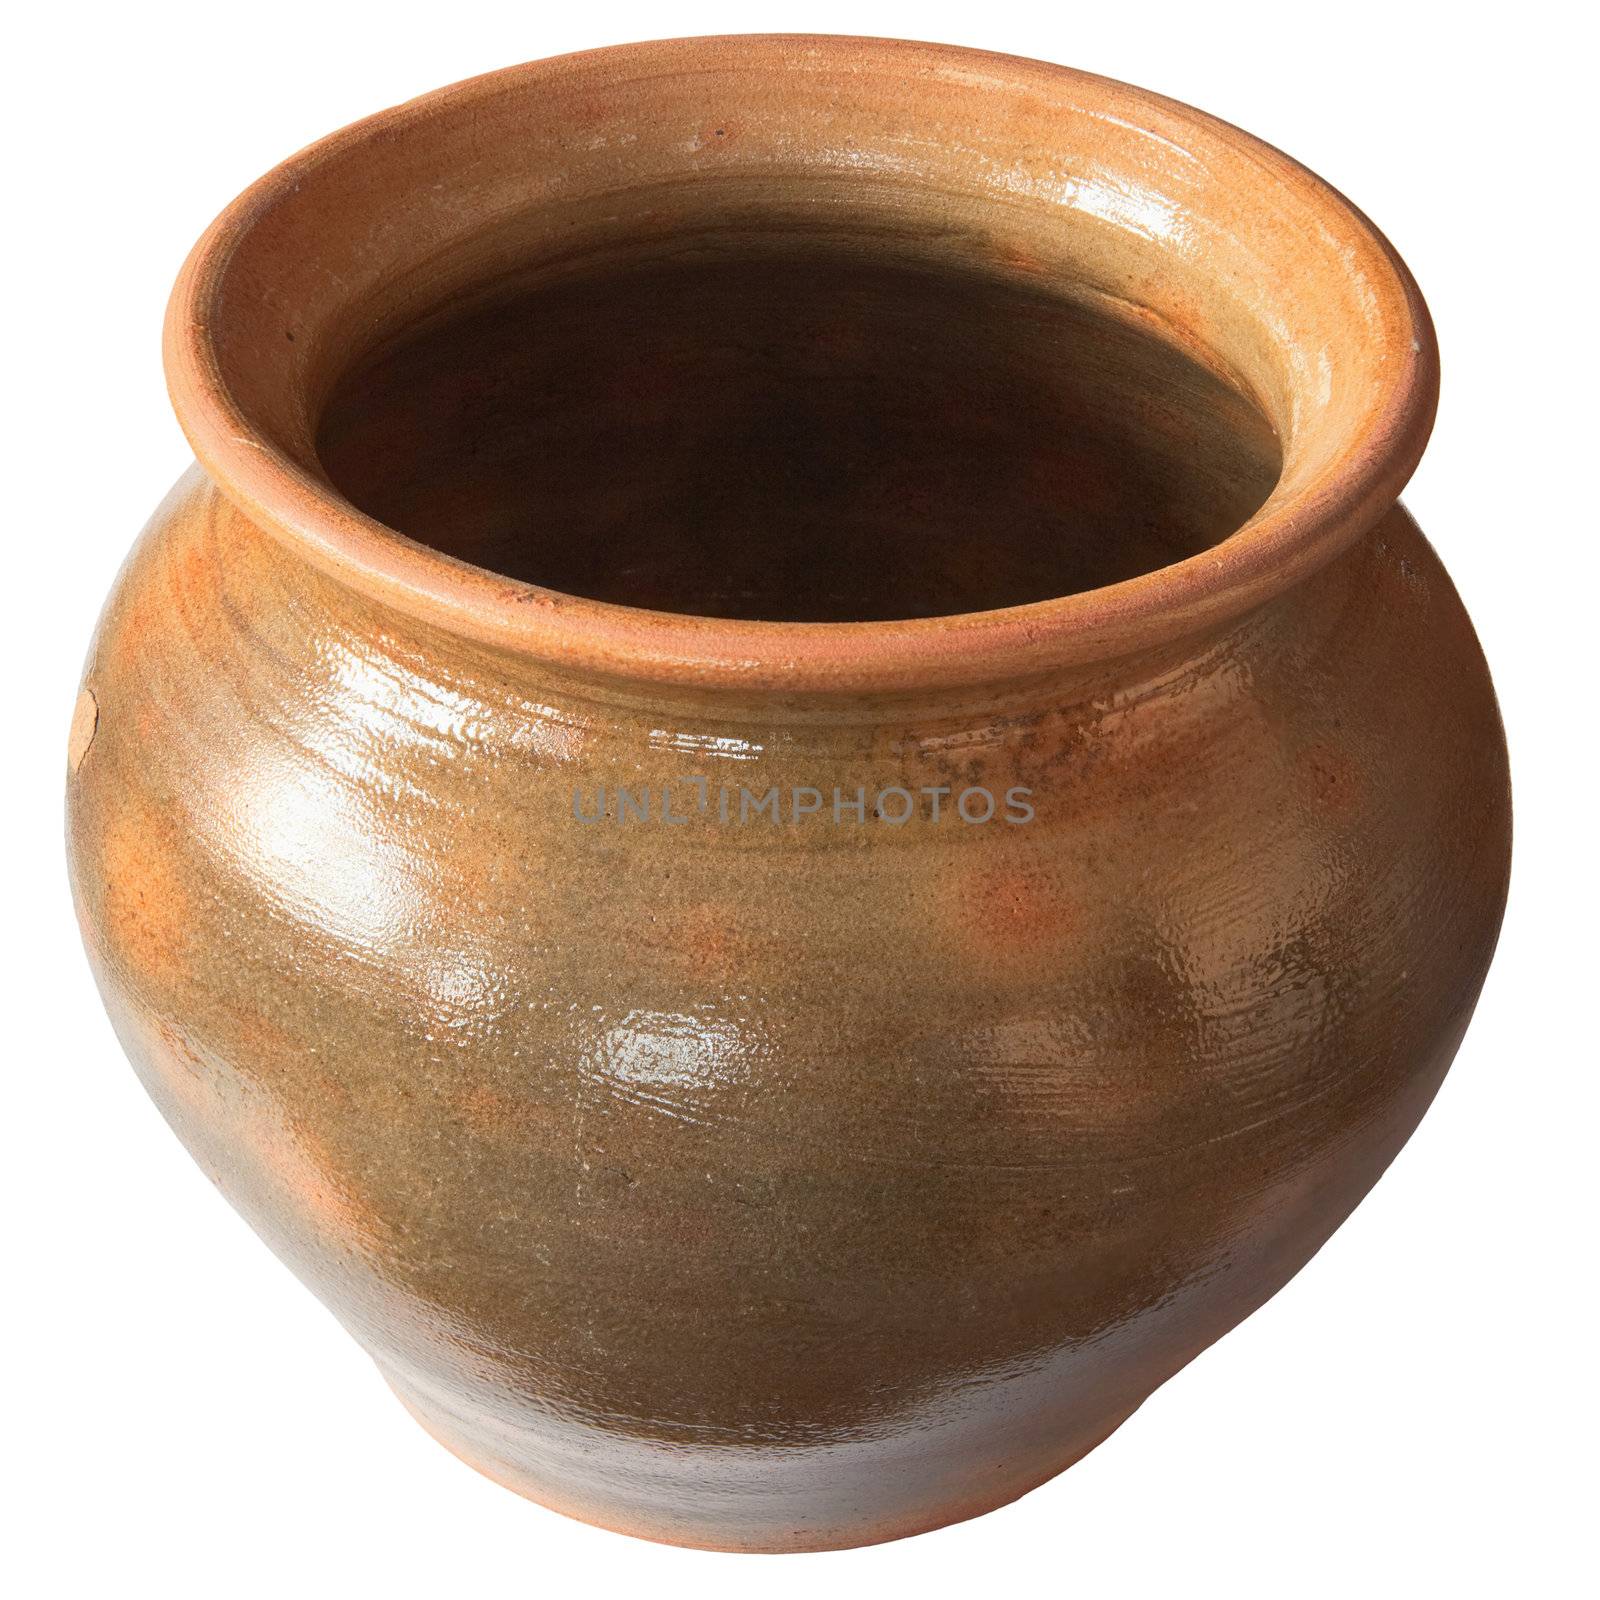 The big old clay pot isolated on a white background